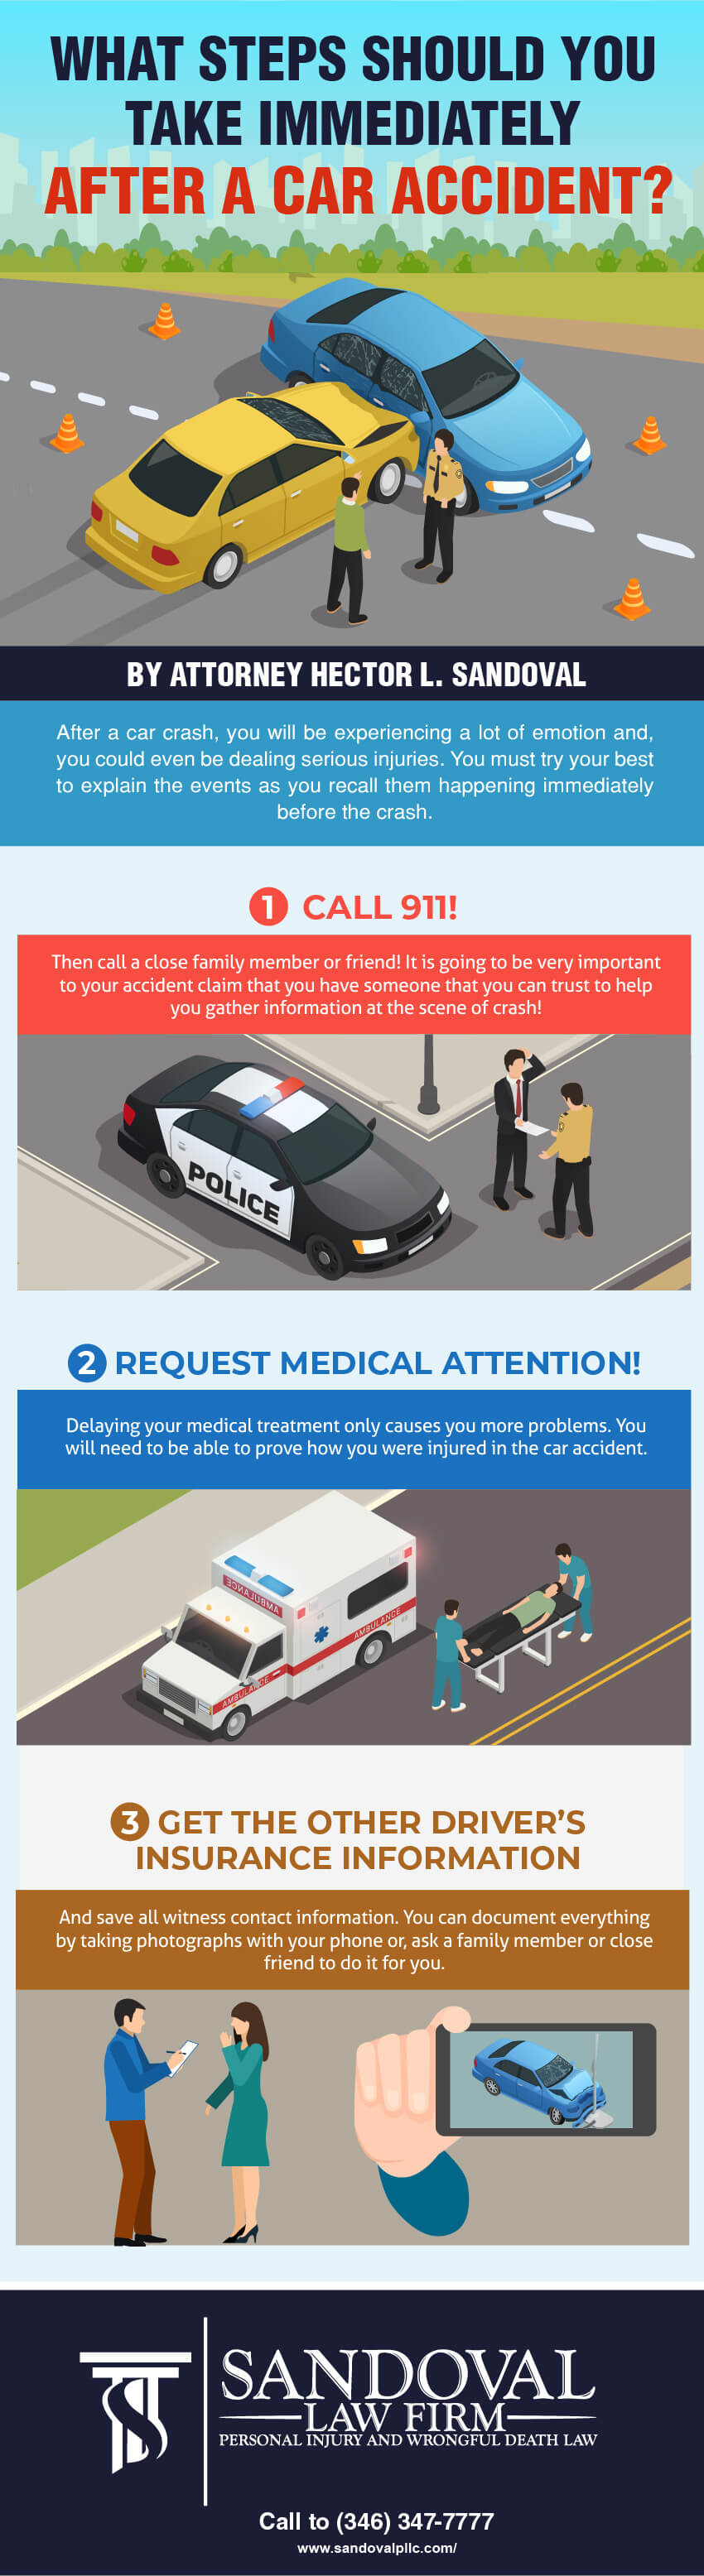 Essential Steps to Take Immediately After a Car Accident: a Complete Guide